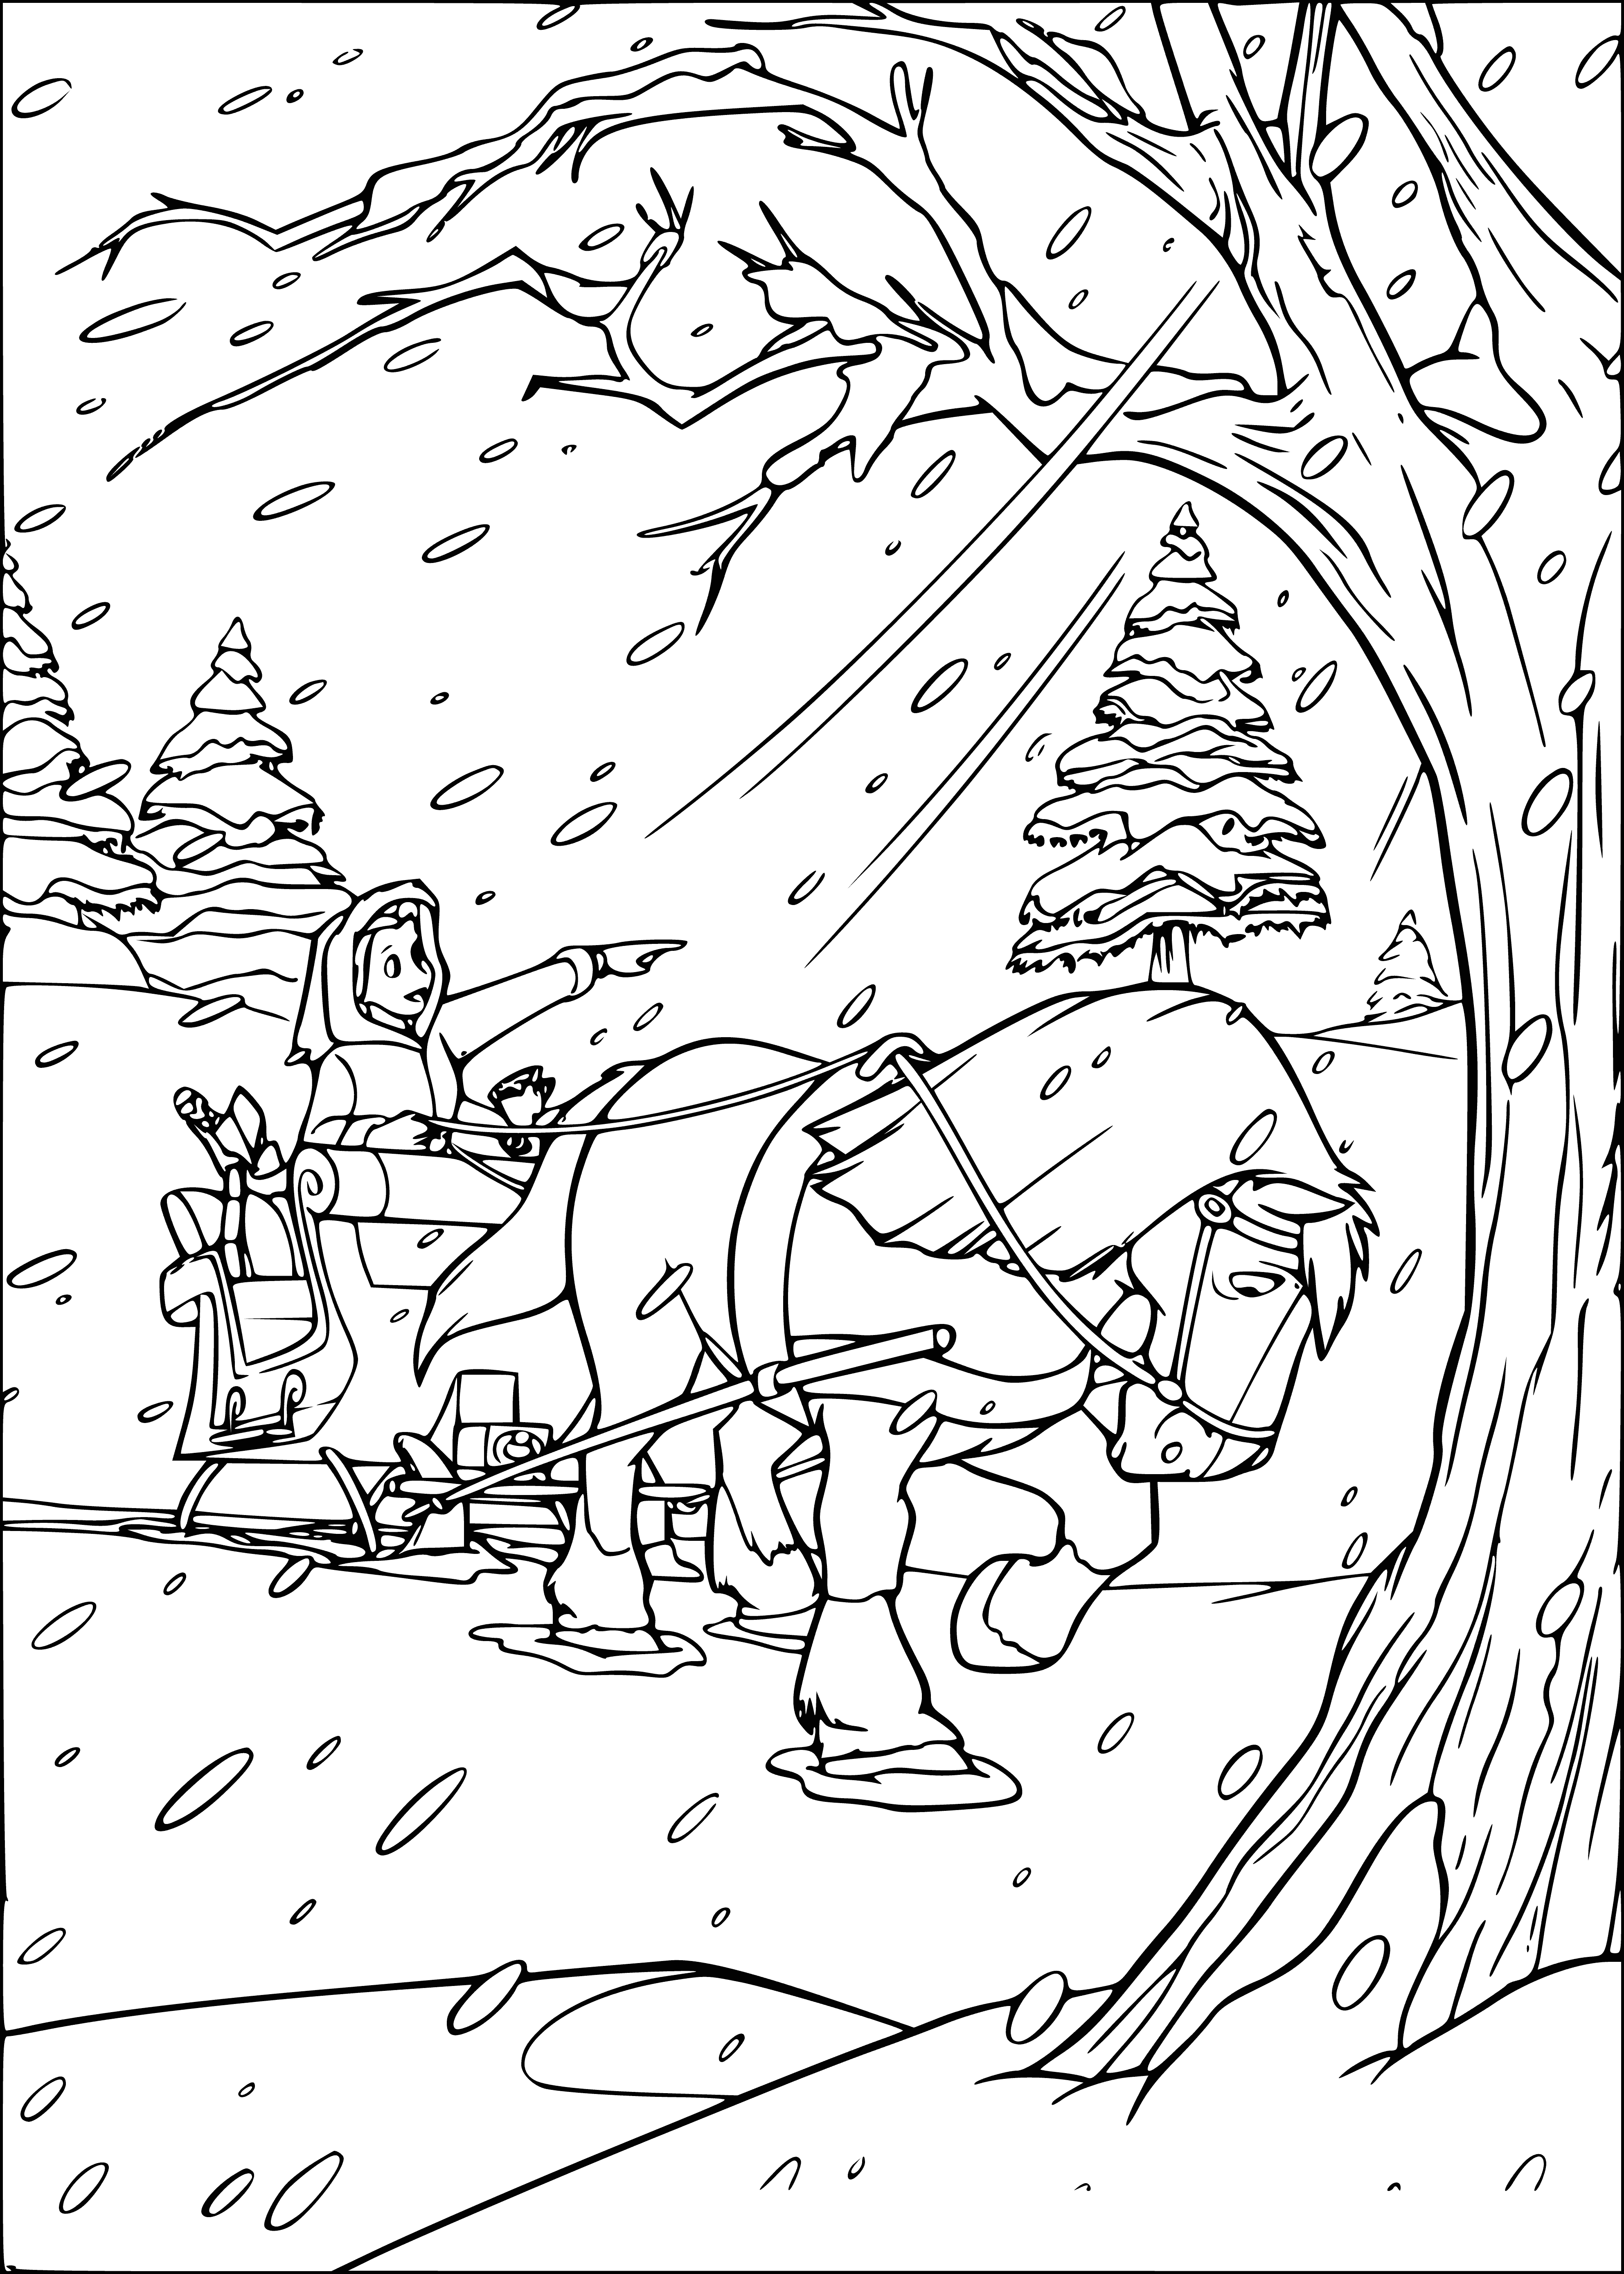 coloring page: Giant Christmas tree, presents, feast, fireplace & stockings, castle view - a magical holiday scene!